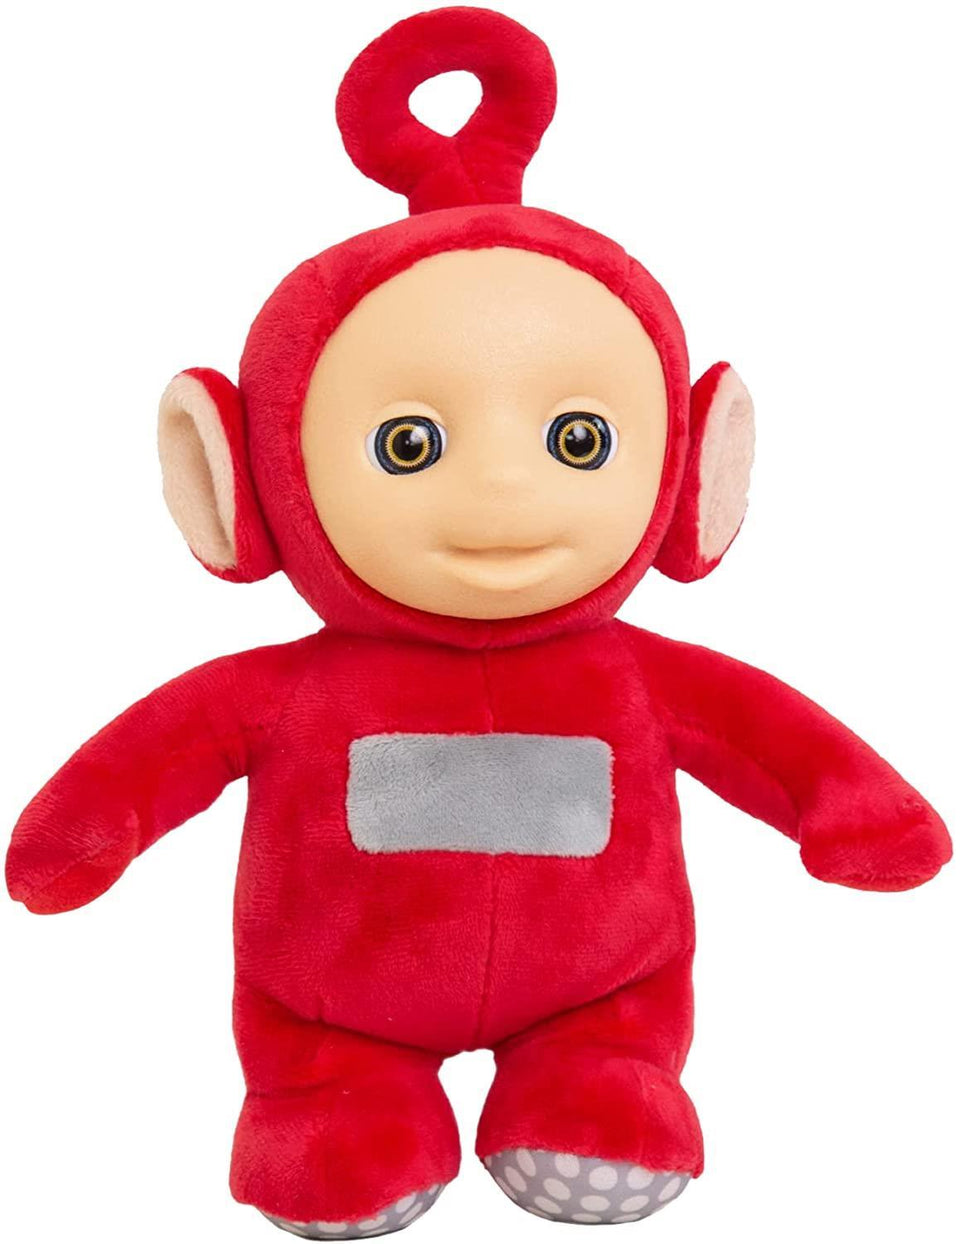 Teletubbies Talking Po Red Plush 11" Character Doll Giggles Talks Toy Mighty Mojo